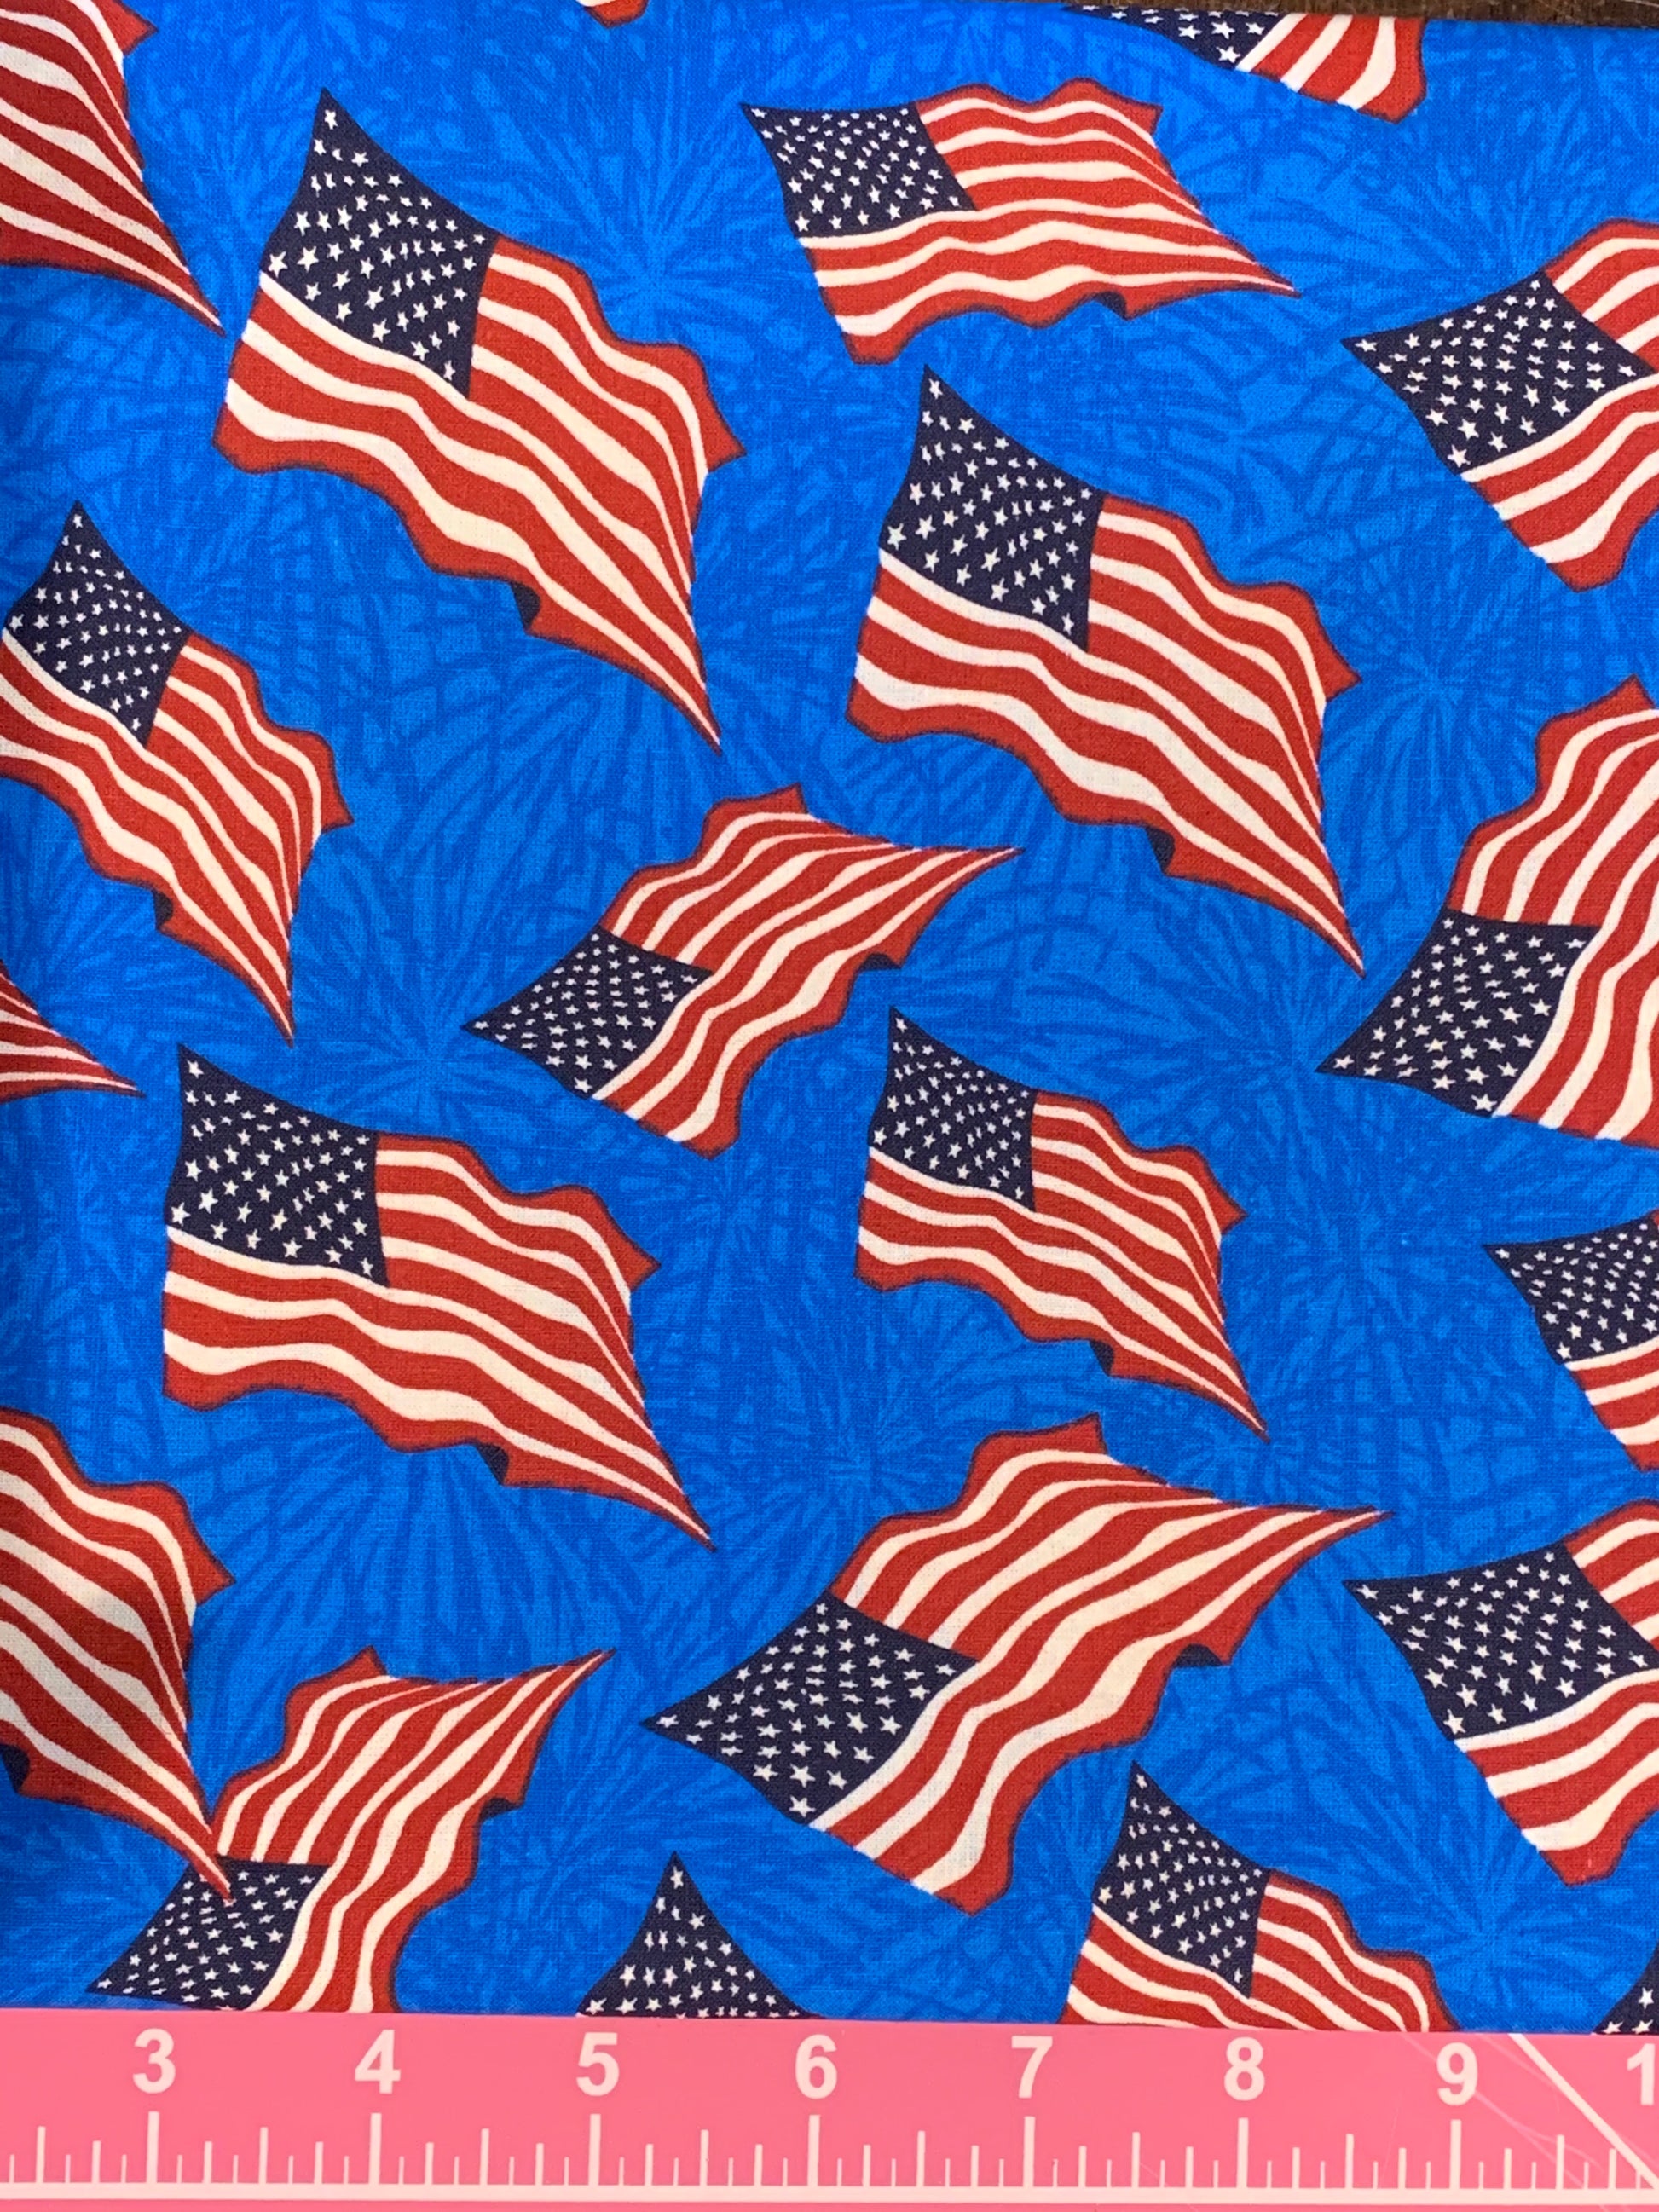 Cotton Fabric - Patriotic Americana - Flags on Blue - Fat Quarter - Beachside Knits N Quilts